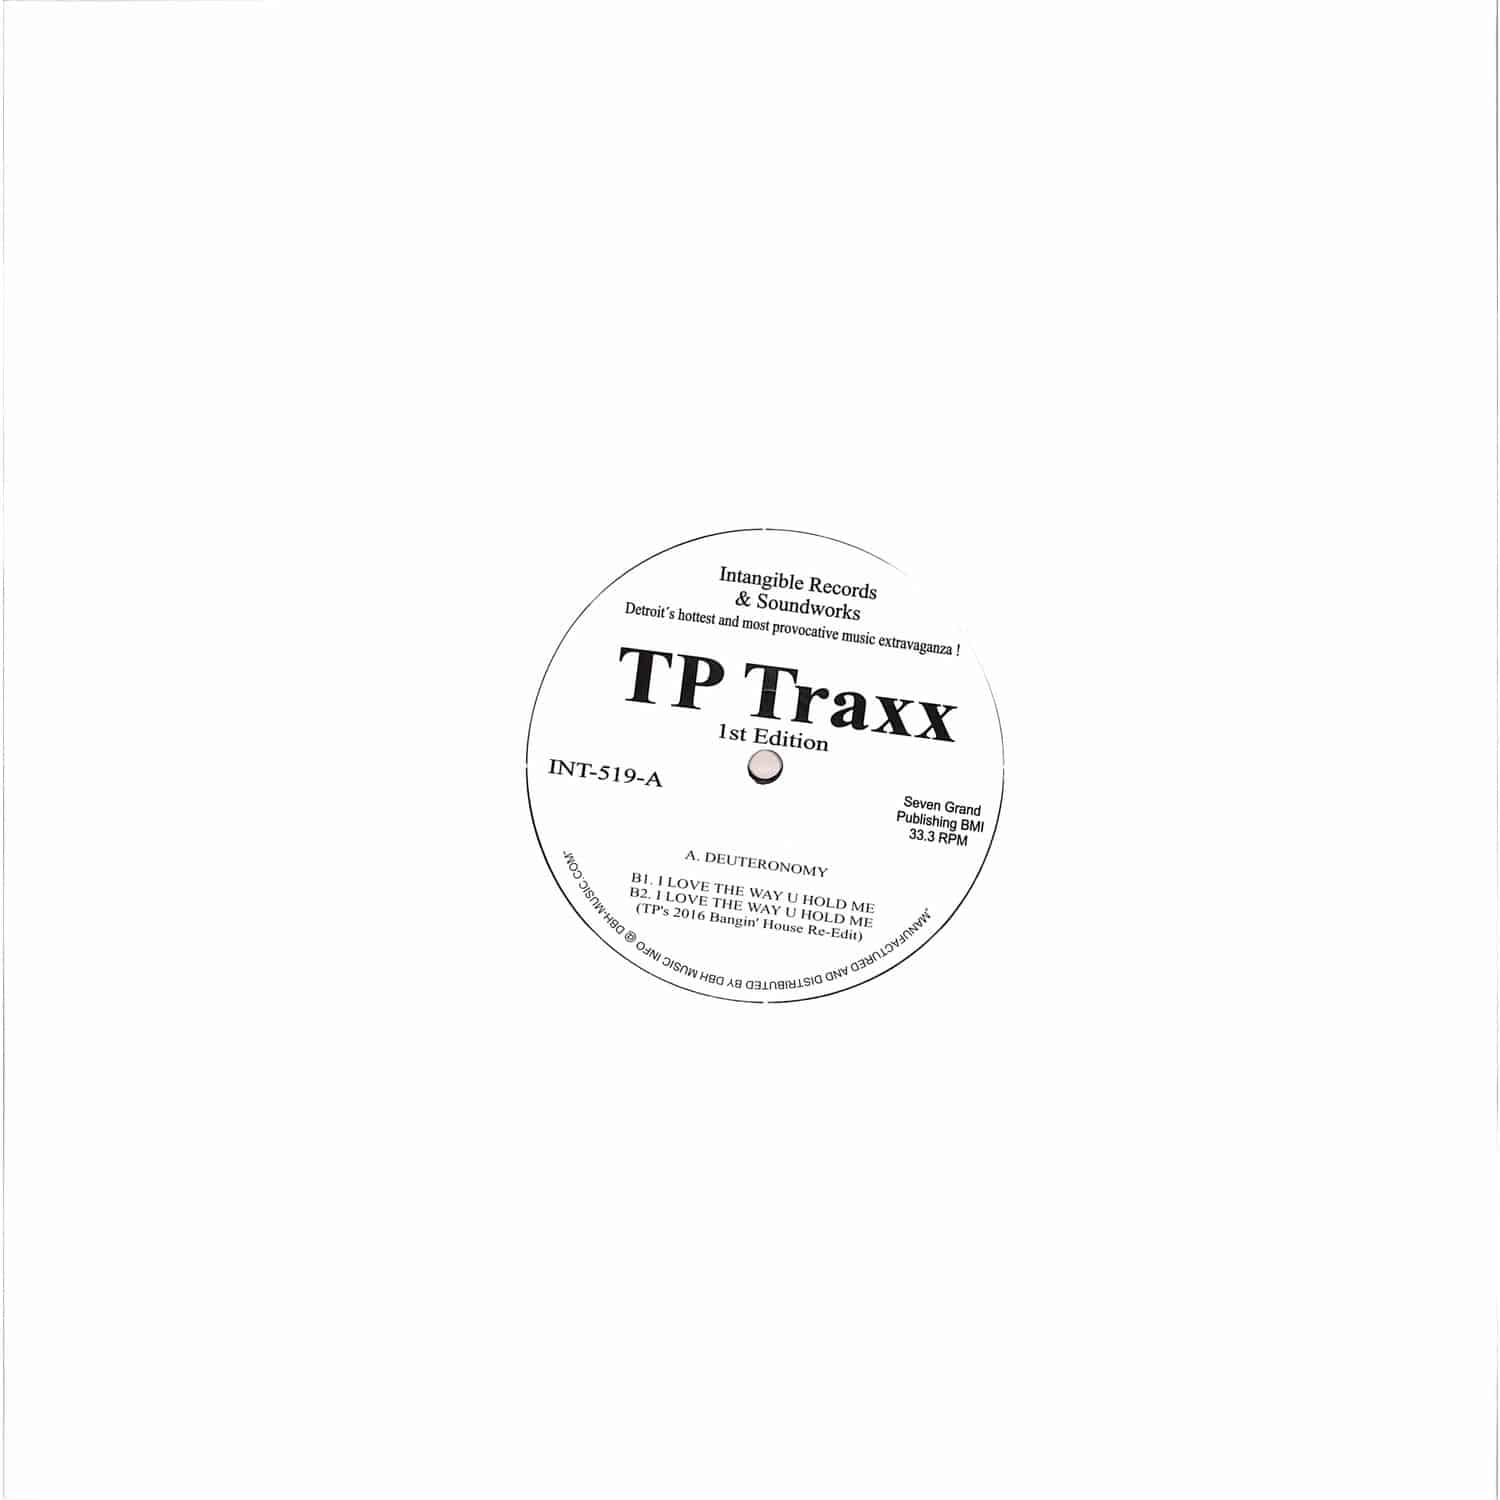 Terrence Parker - TP TRAXX 1ST EDITION